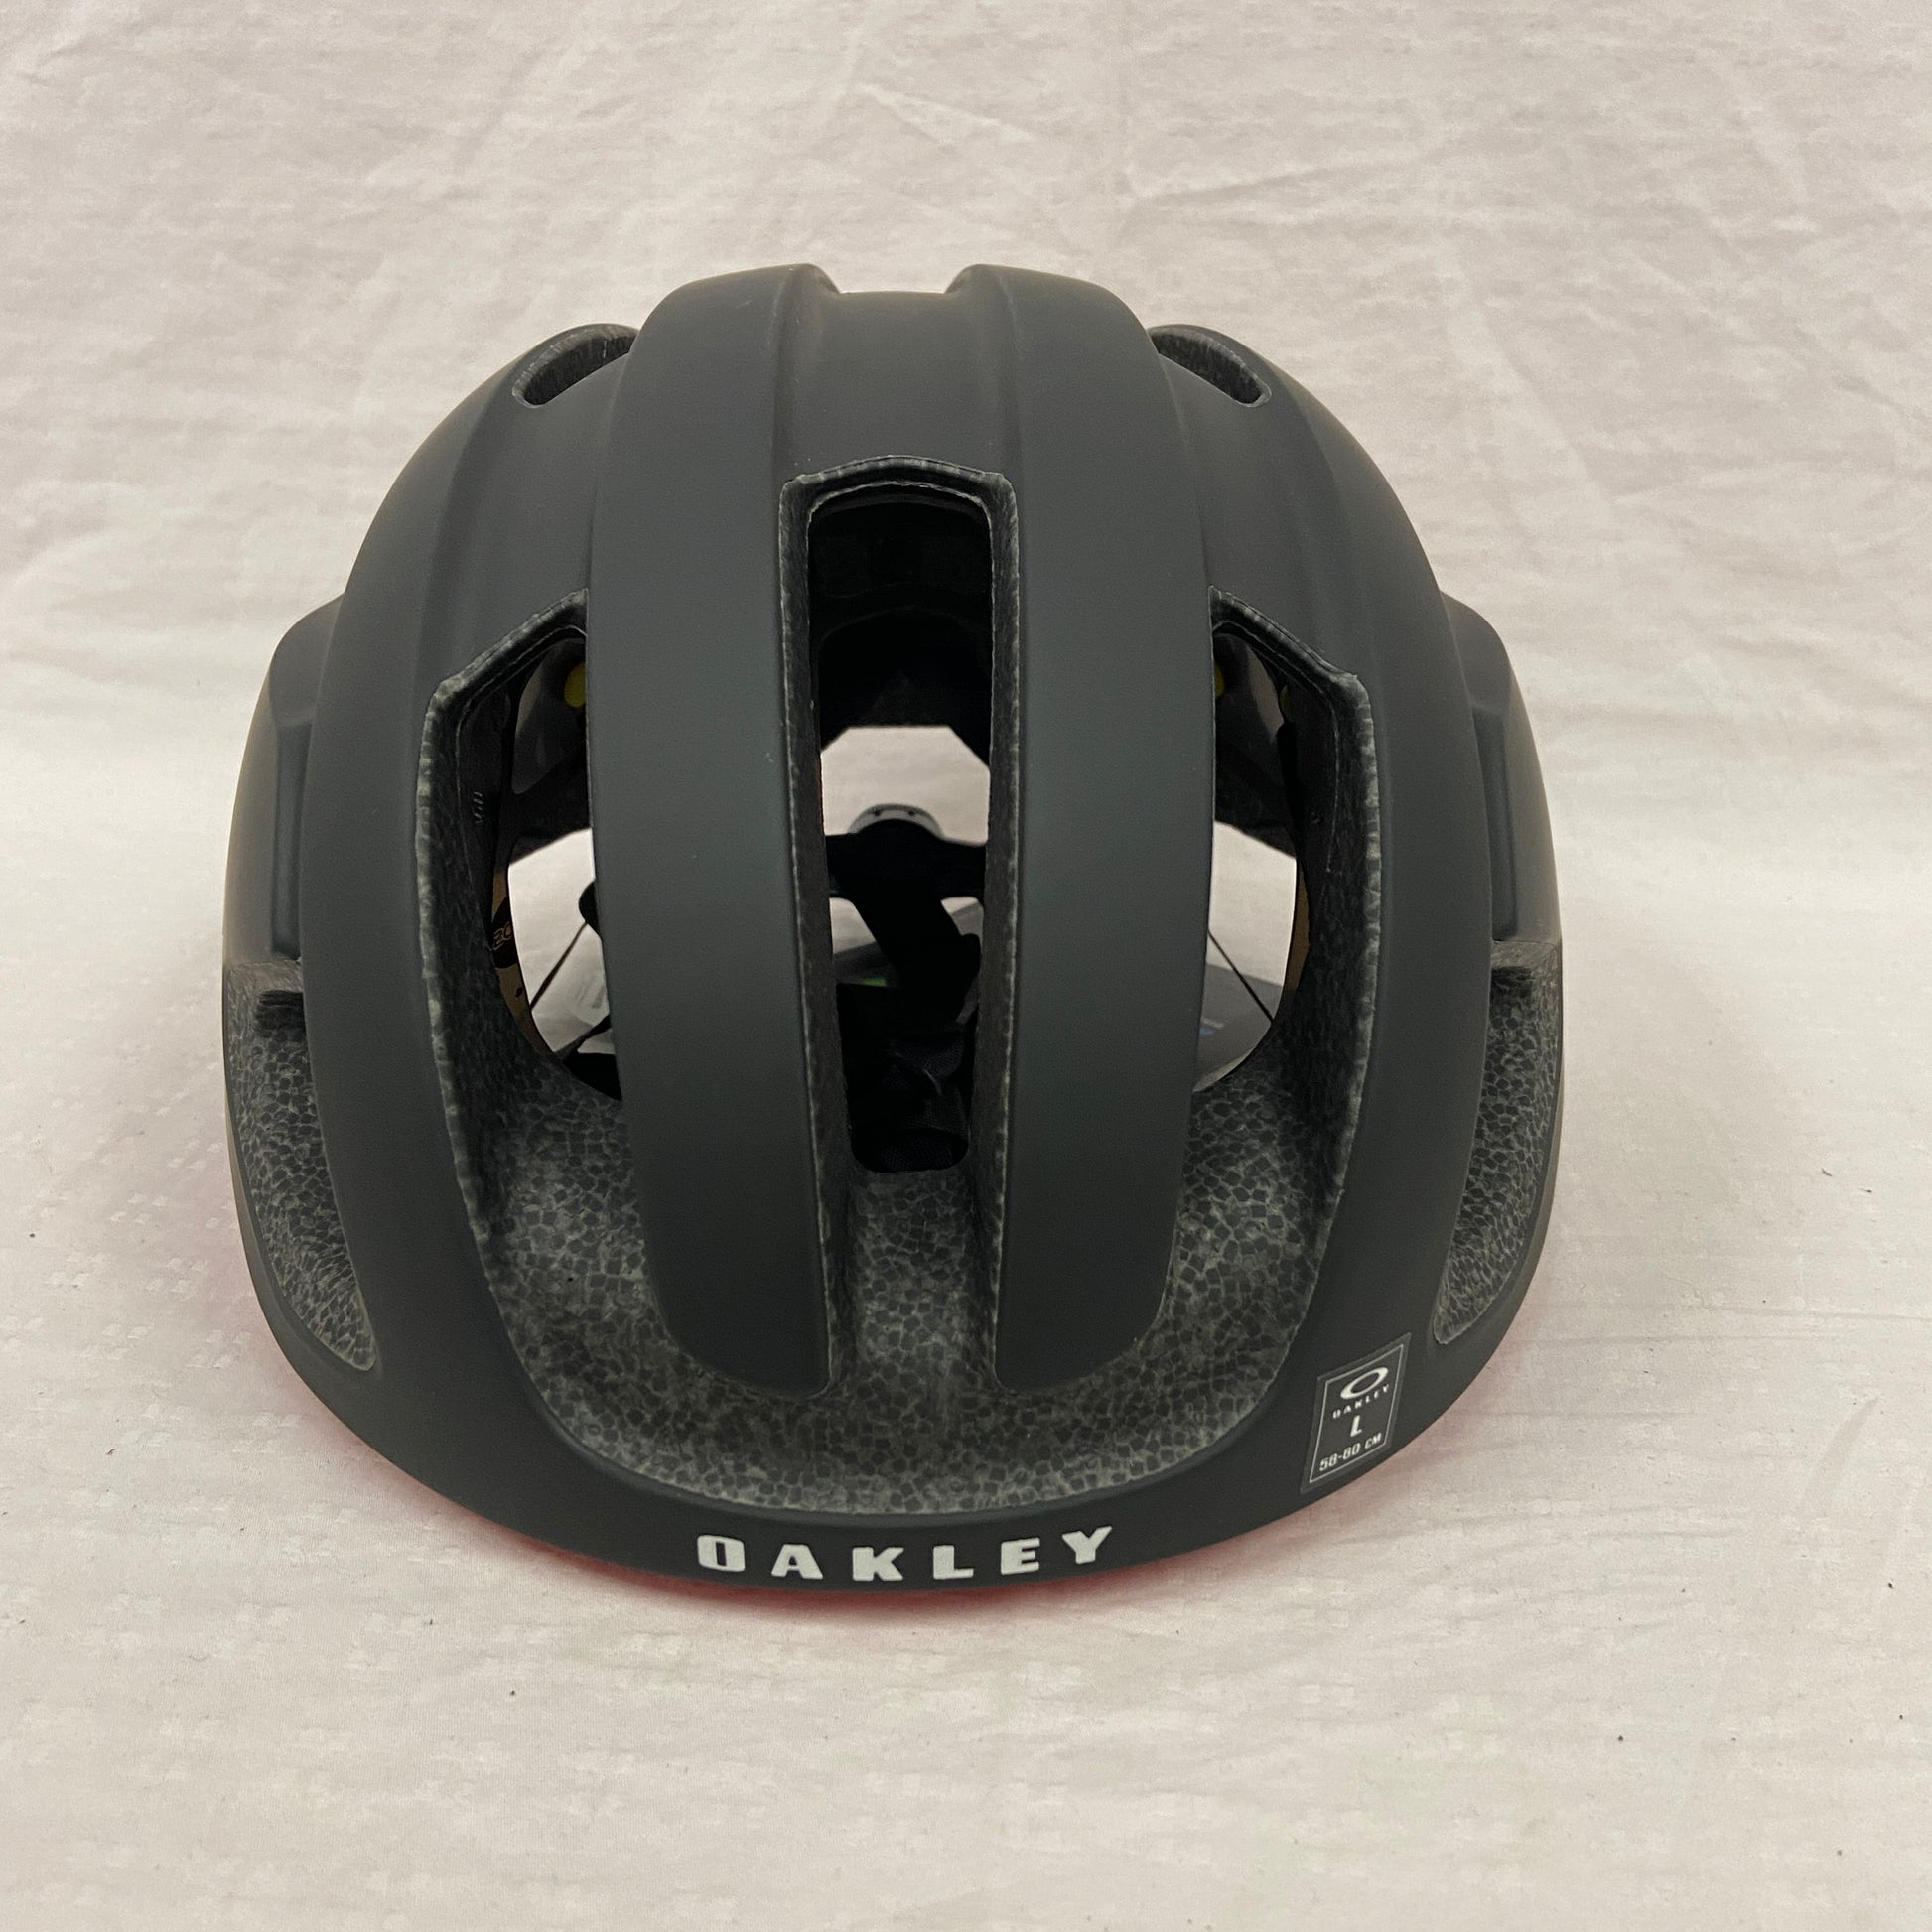 Oakley MIPS Aro 3 Cycling Helmet Red / Black Large (No Box) - ExtremeSupply.com